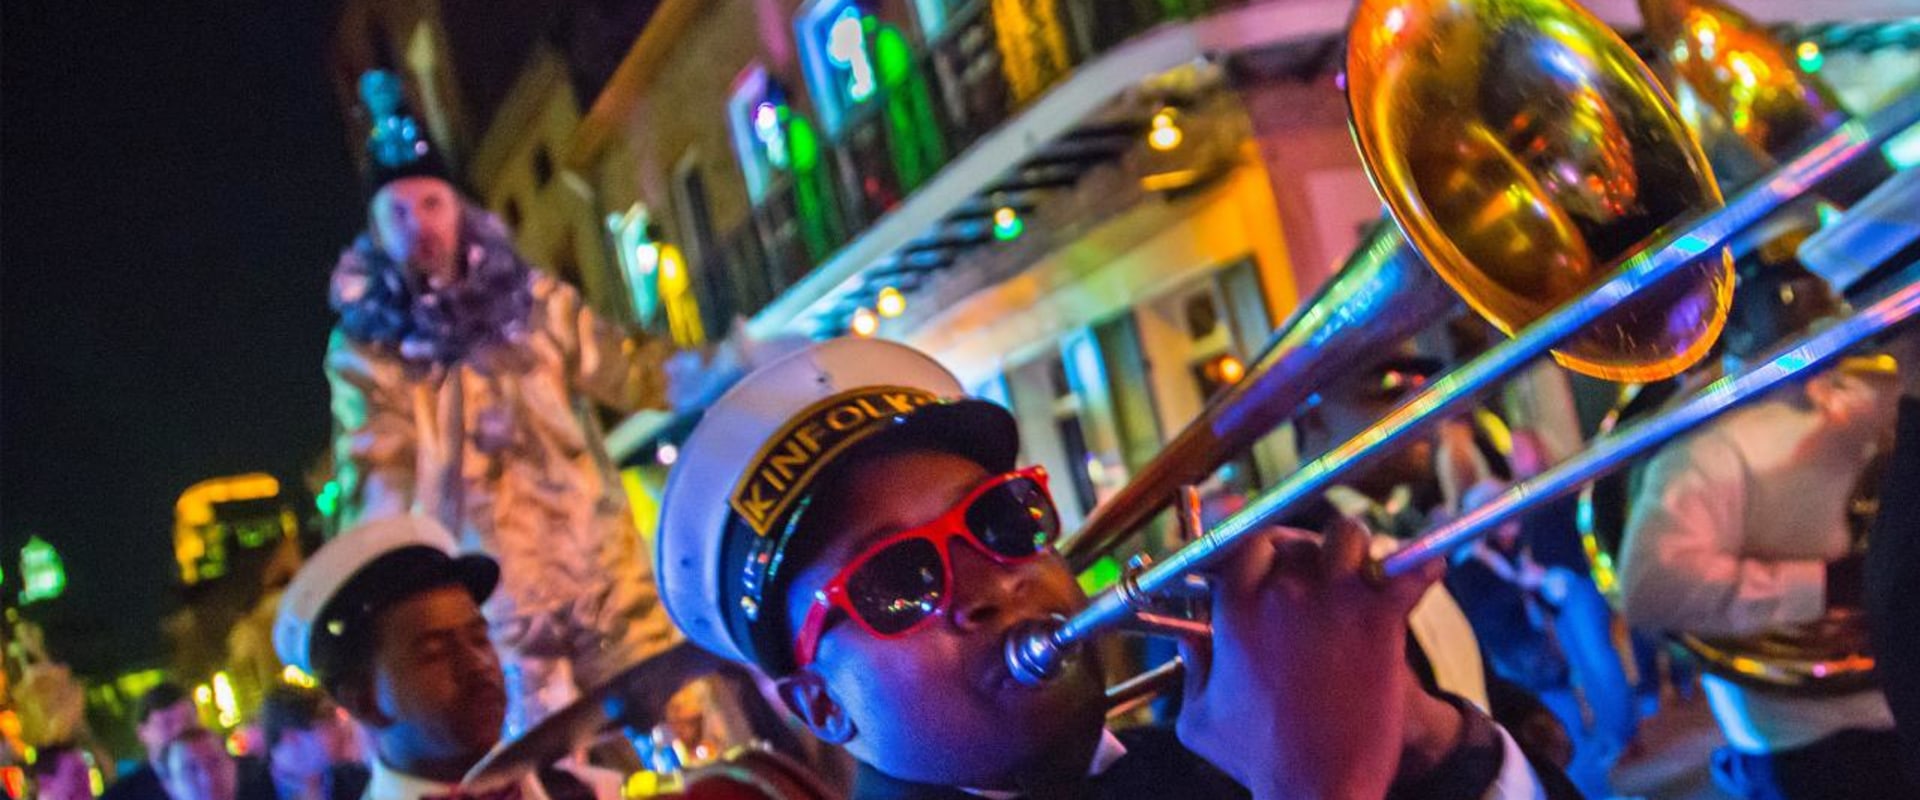 The Best Jazz Music Venues in New Orleans